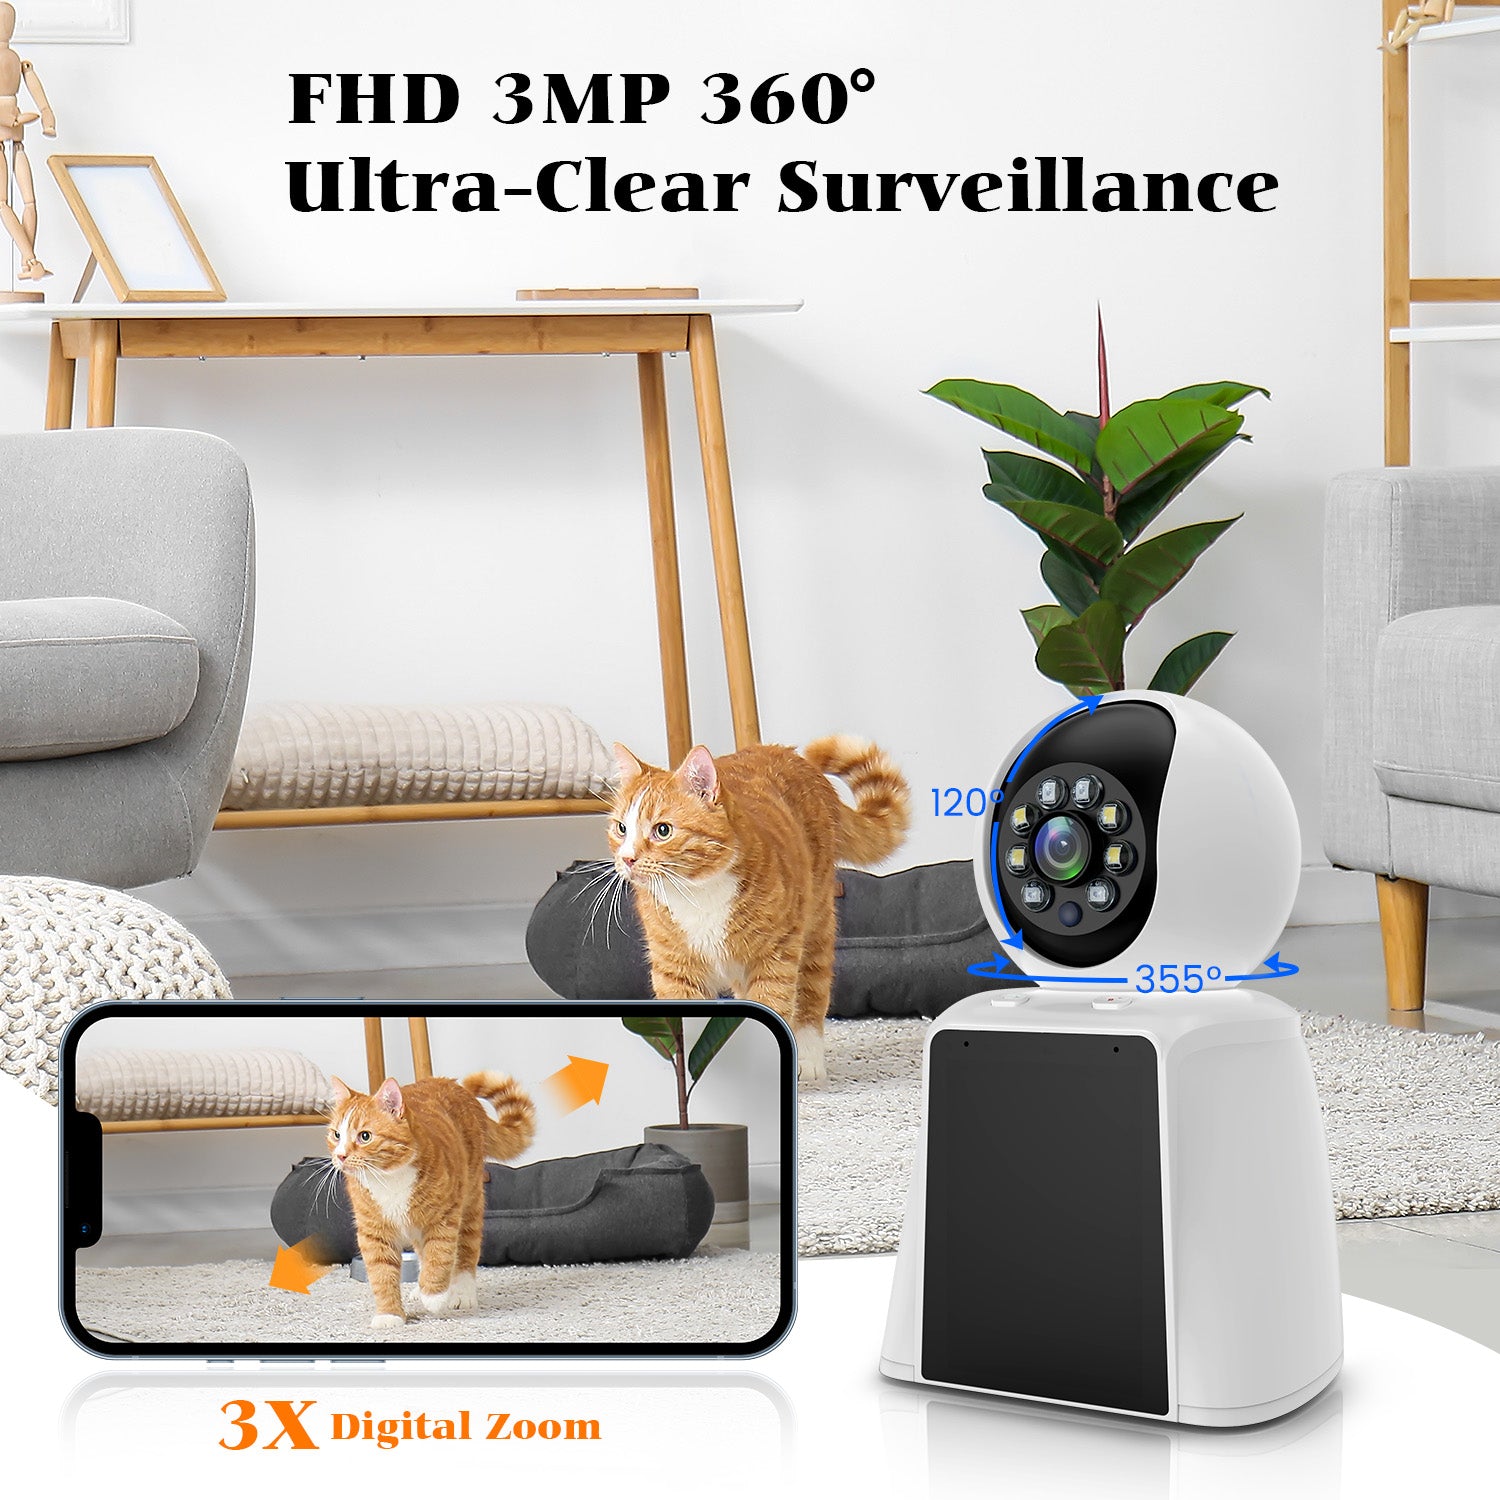 Indoor Video Camera Two-Way Video Monitor 2.4GHz WiFi Home Security Camera for Pet Dog Baby Elder Nanny with Phone App Motion Detection Night Vision Siren Alarm TF Card & Cloud Storage